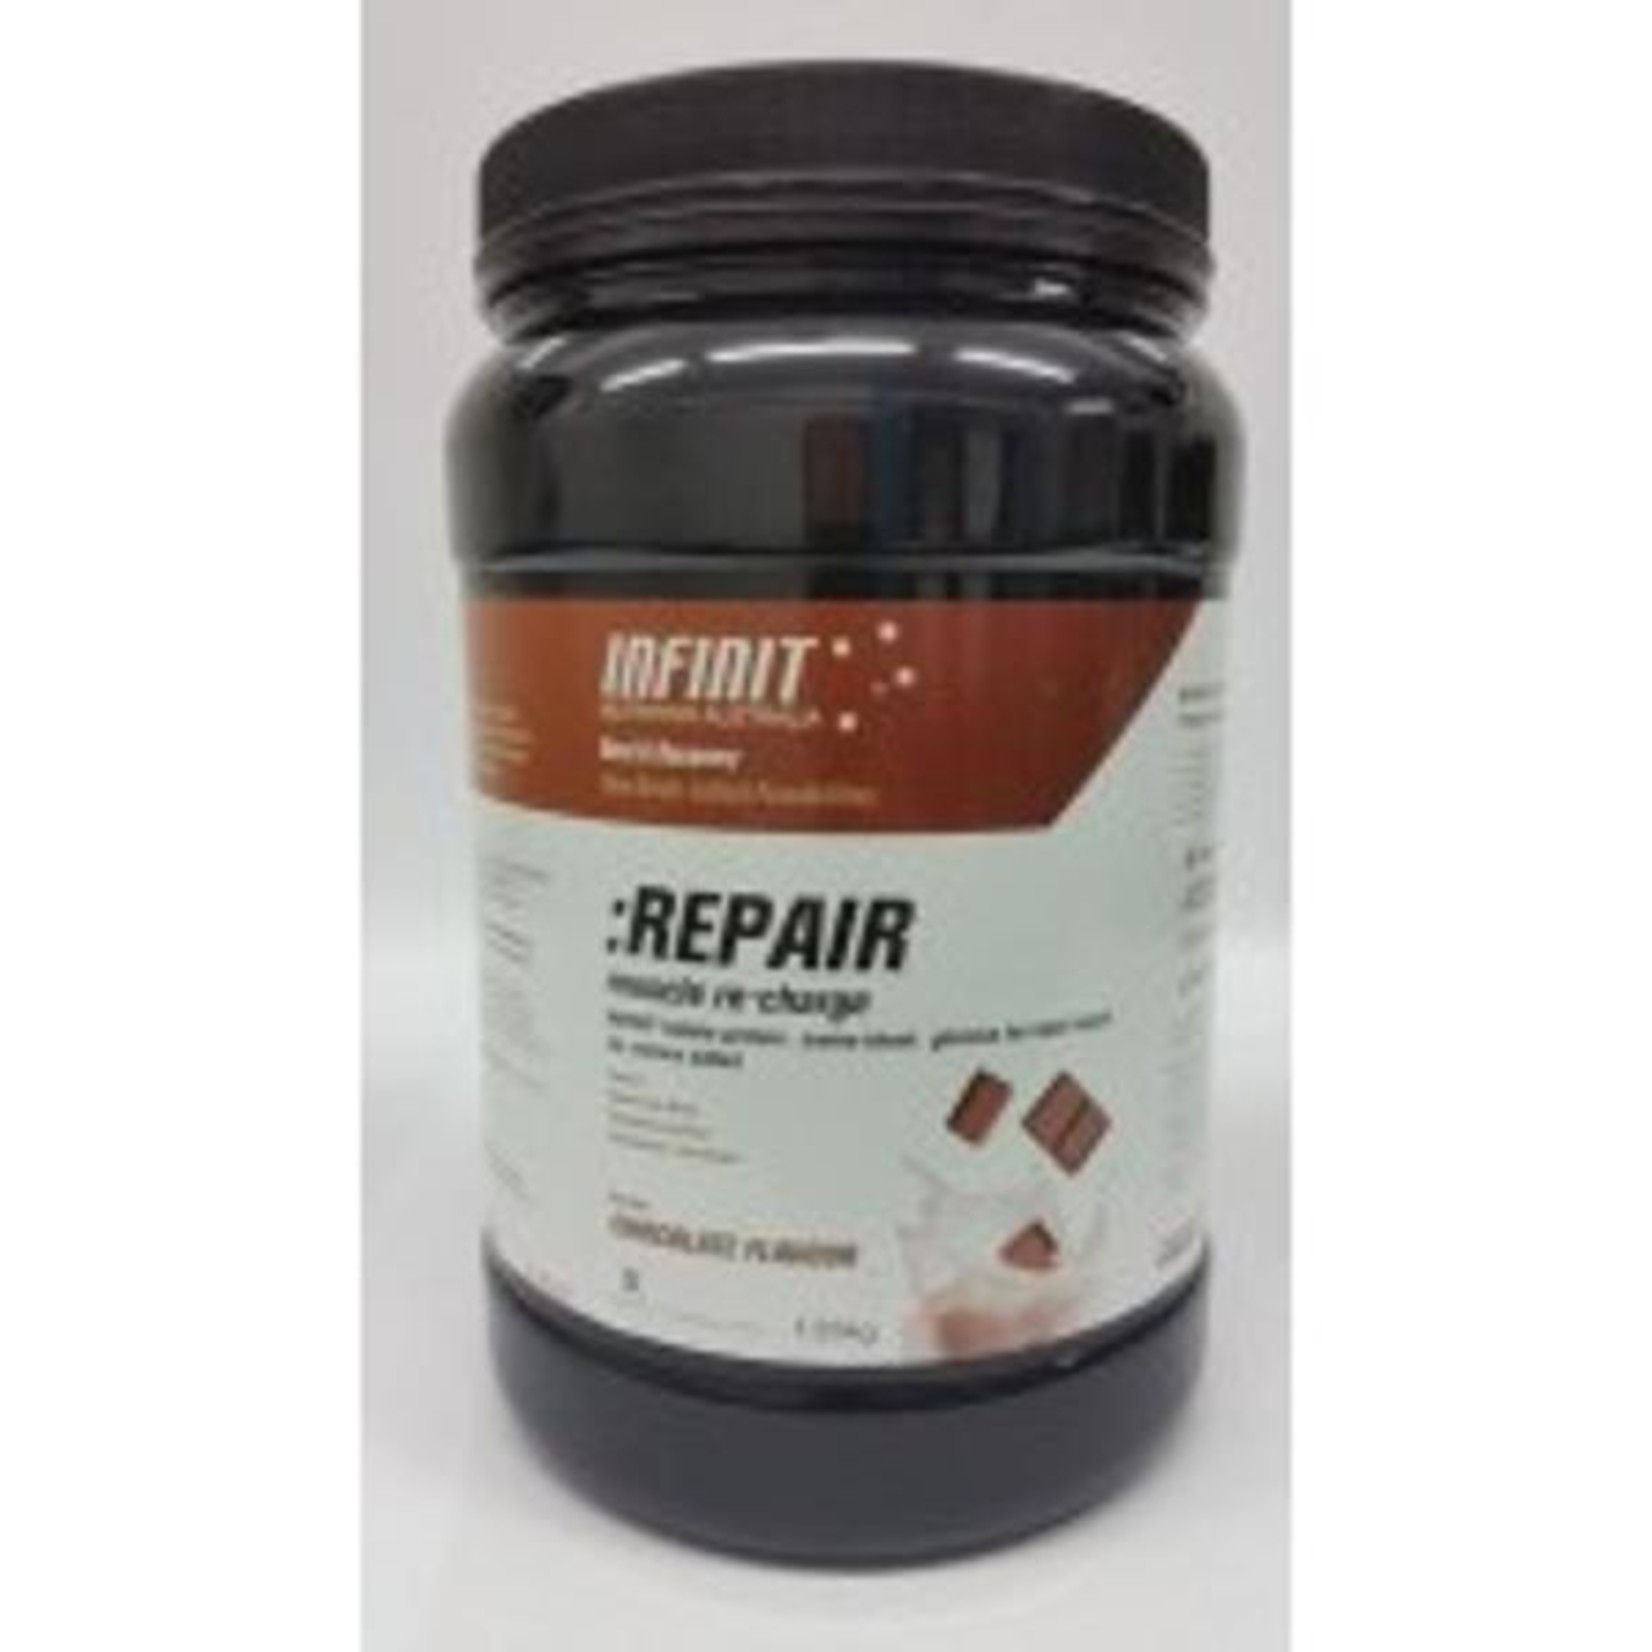 Infinit Nutrition Infinit Nutrition Repair Tub 1.2Kg Chocolate Flavour With No Colours